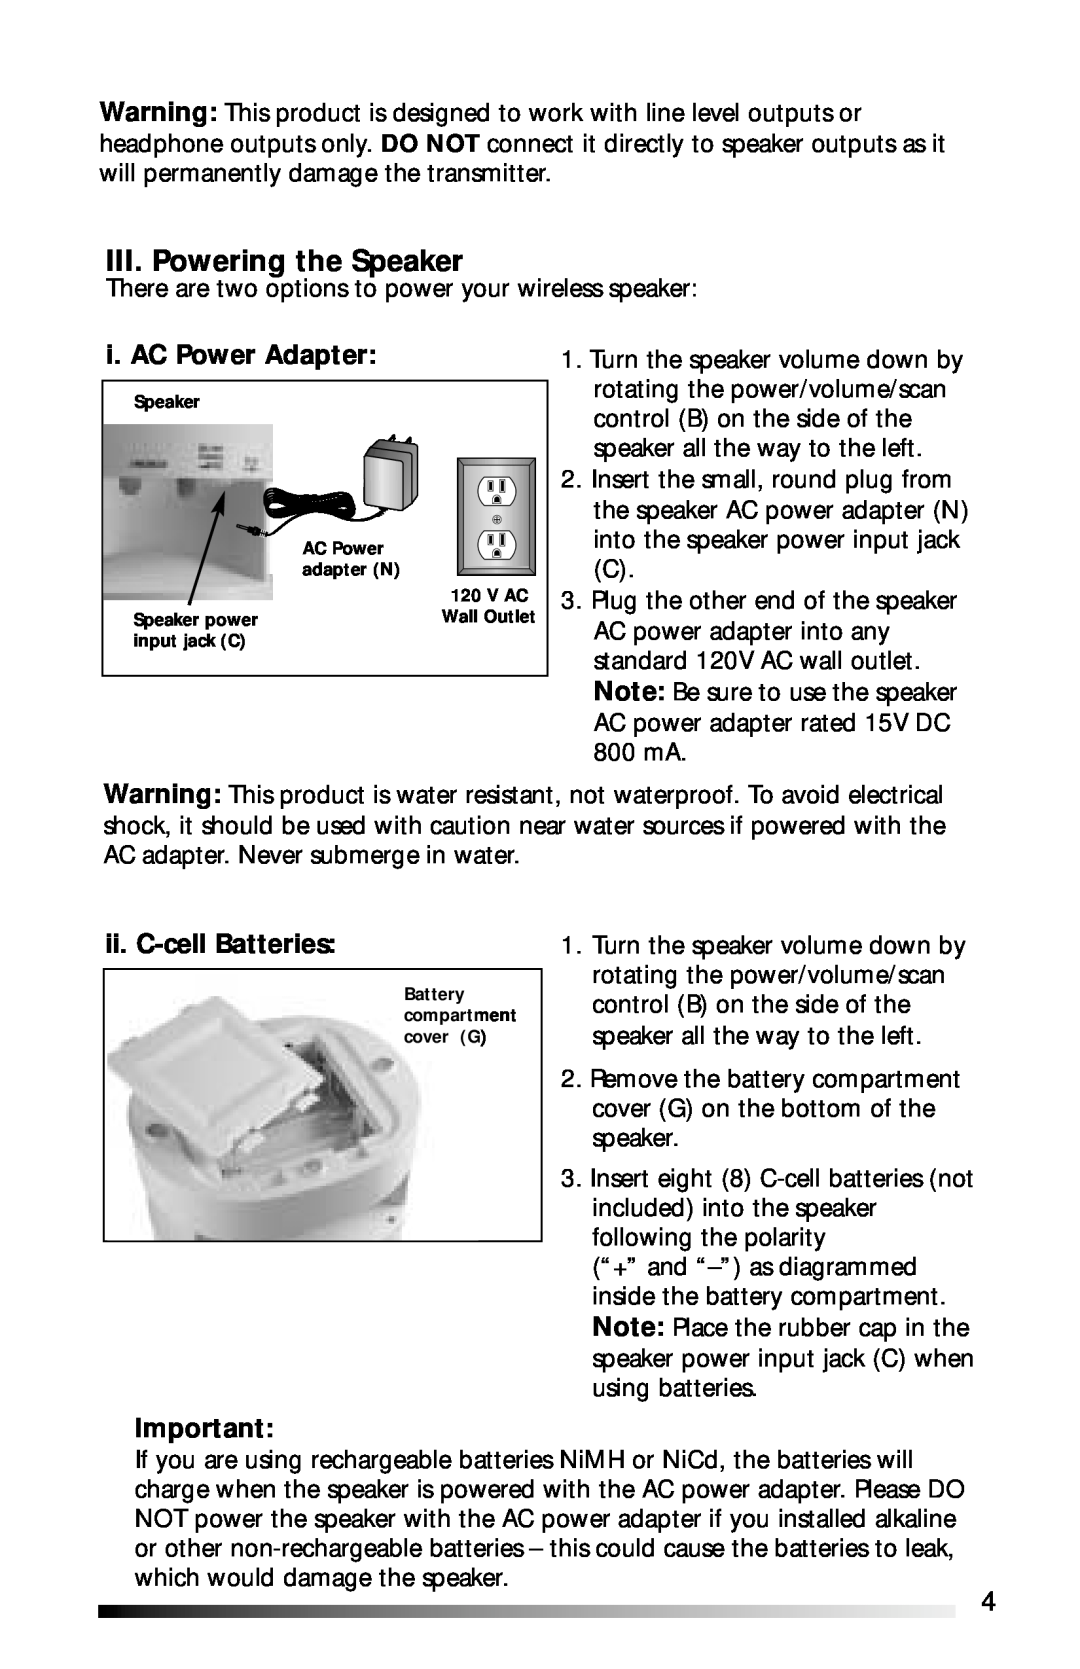 Recoton/Advent AW811 operation manual III. Powering the Speaker, i. AC Power Adapter, ii. C-cellBatteries 